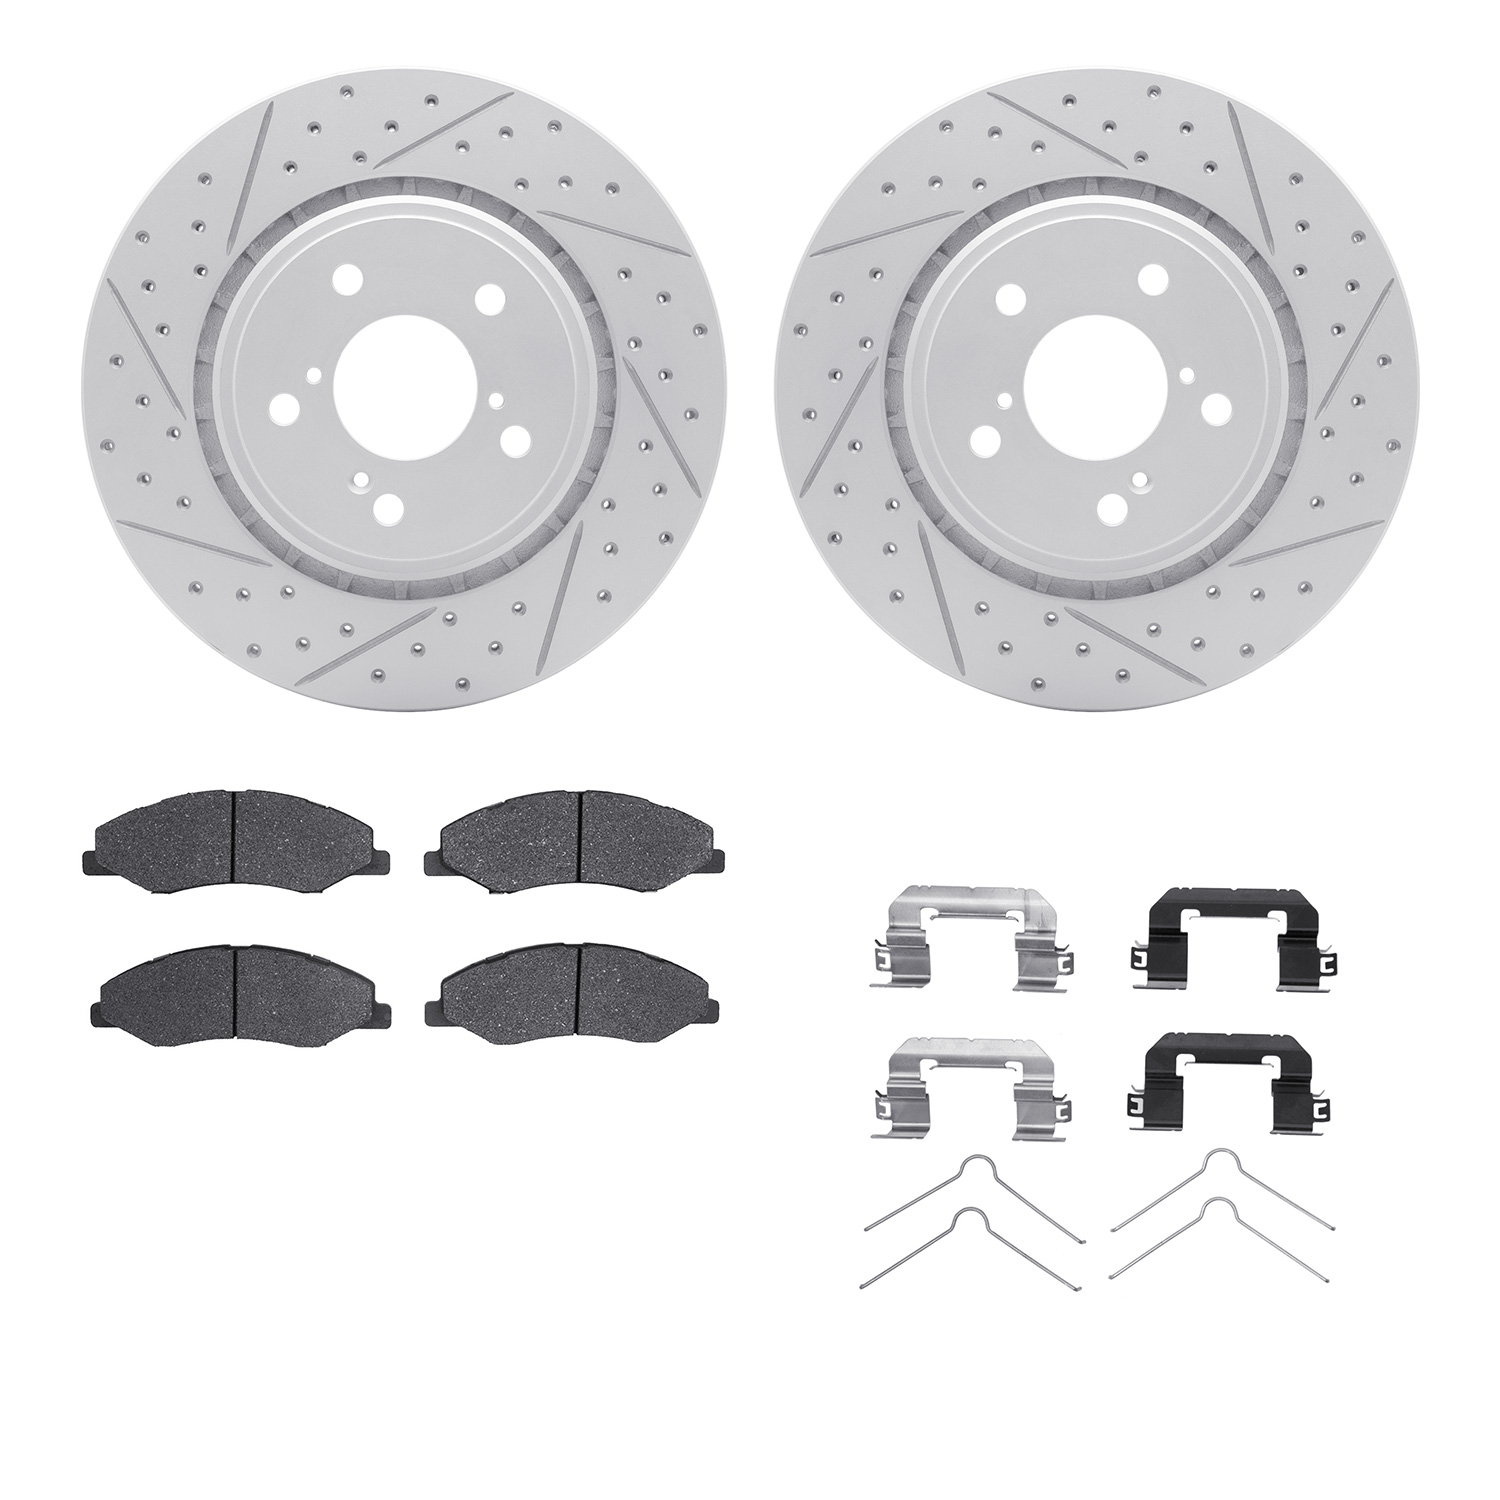 2512-59083 Geoperformance Drilled/Slotted Rotors w/5000 Advanced Brake Pads Kit & Hardware, Fits Select Acura/Honda, Position: F